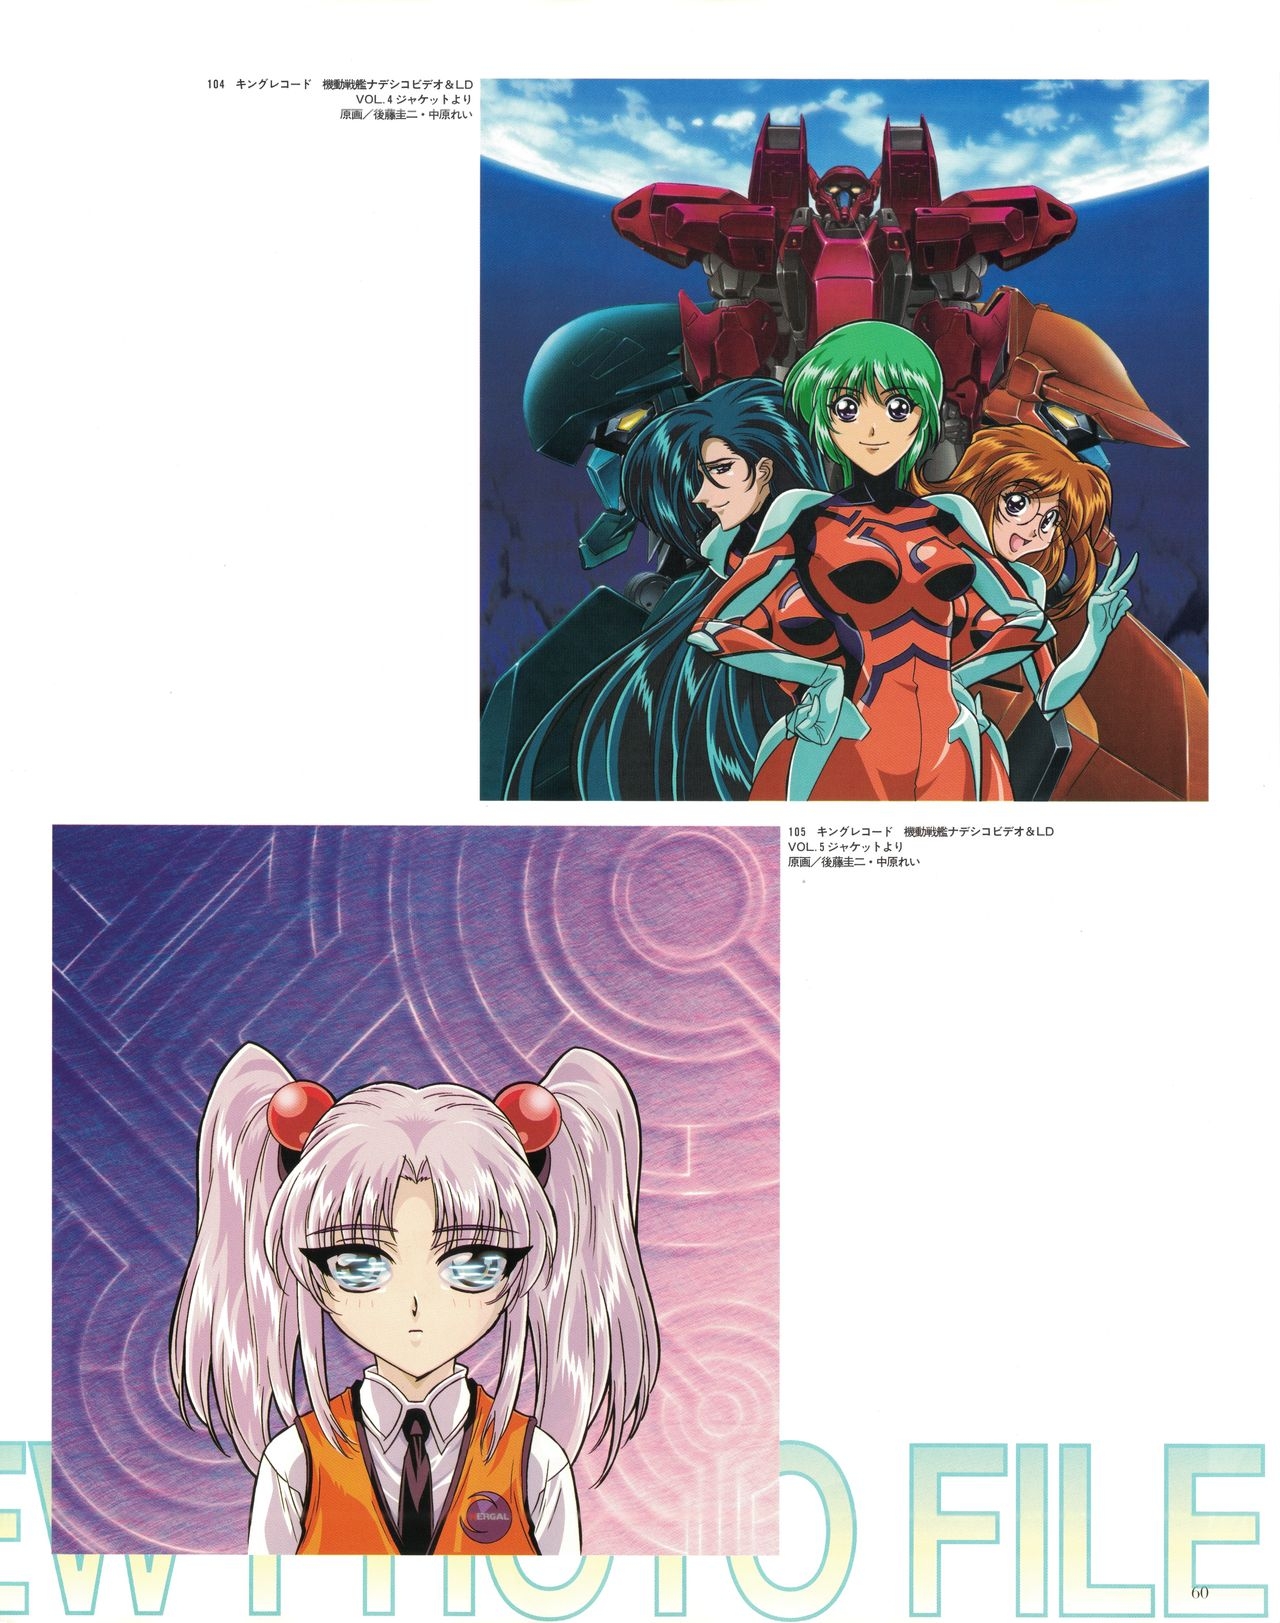 Newtype 100% Collection - Martian Successor Nadesico Perfects 63